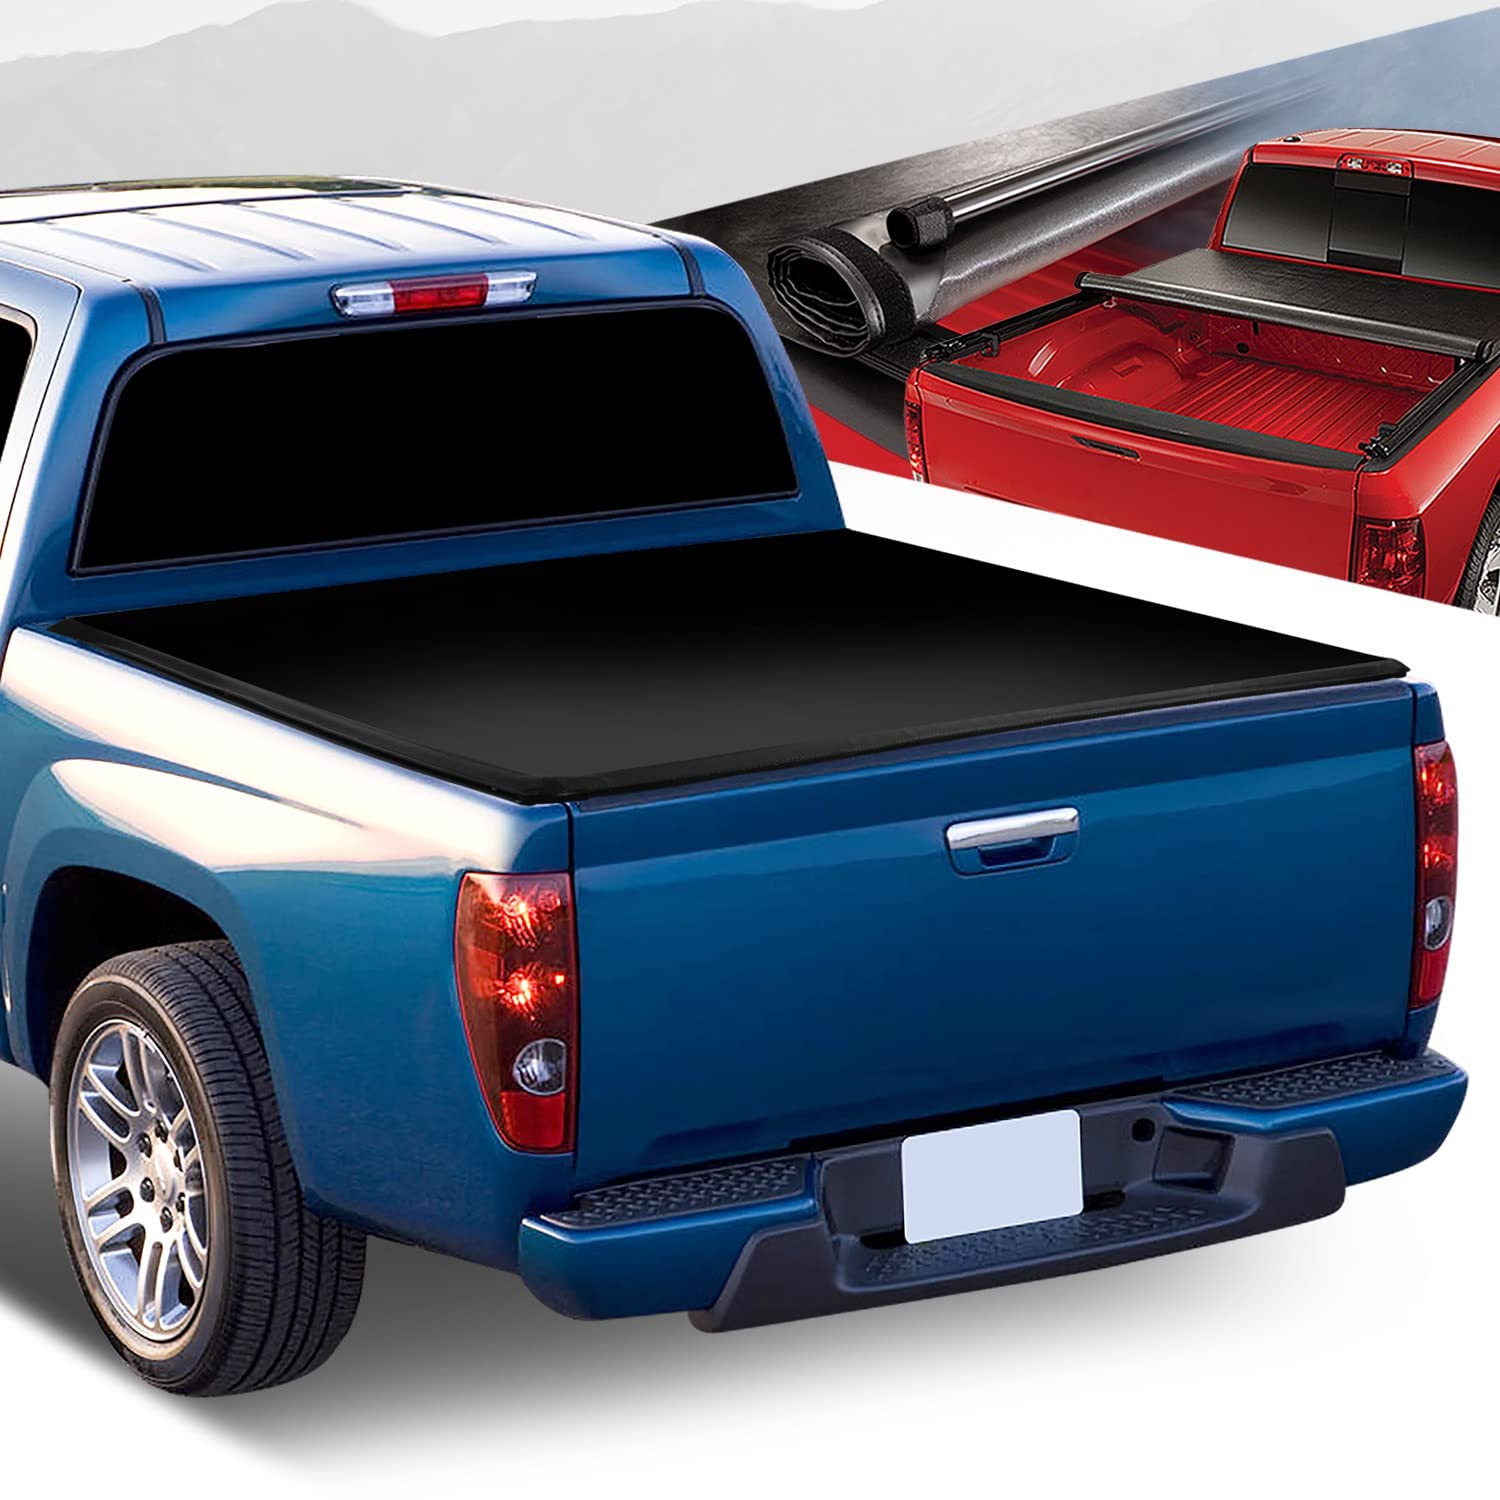 Vinyl Soft Top Roll-up Adjustable Truck Tonneau Cover Kit Compatible with  Chevy Colorado GMC Canyon Isuzu I-350 I-370 5Ft Fleetside Short Bed 04-12,  Matte Black